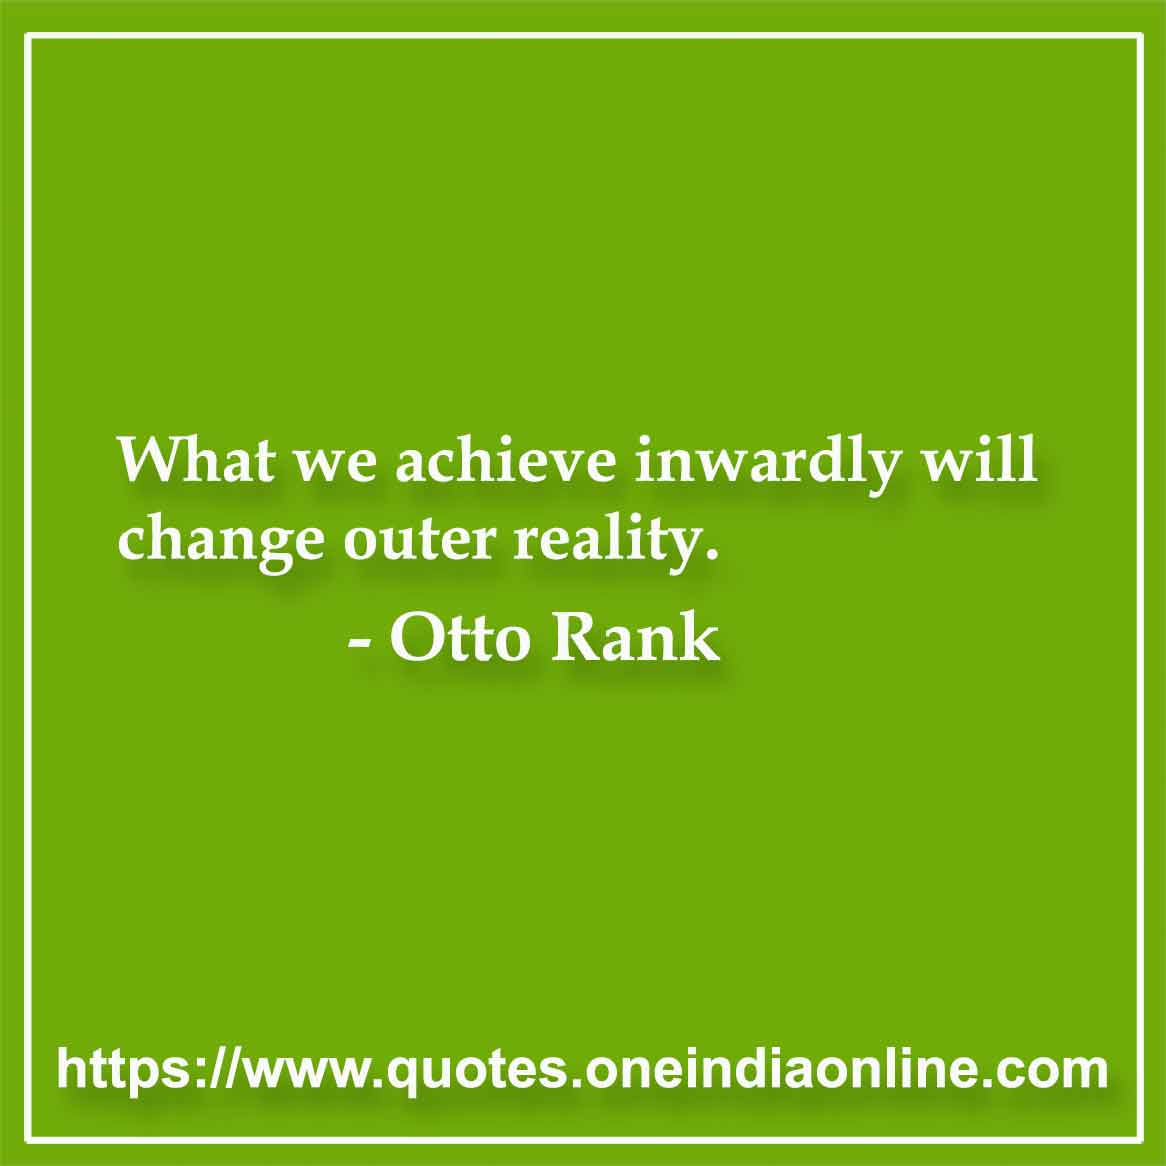 What we achieve inwardly will change outer reality.

-  Otto Rank